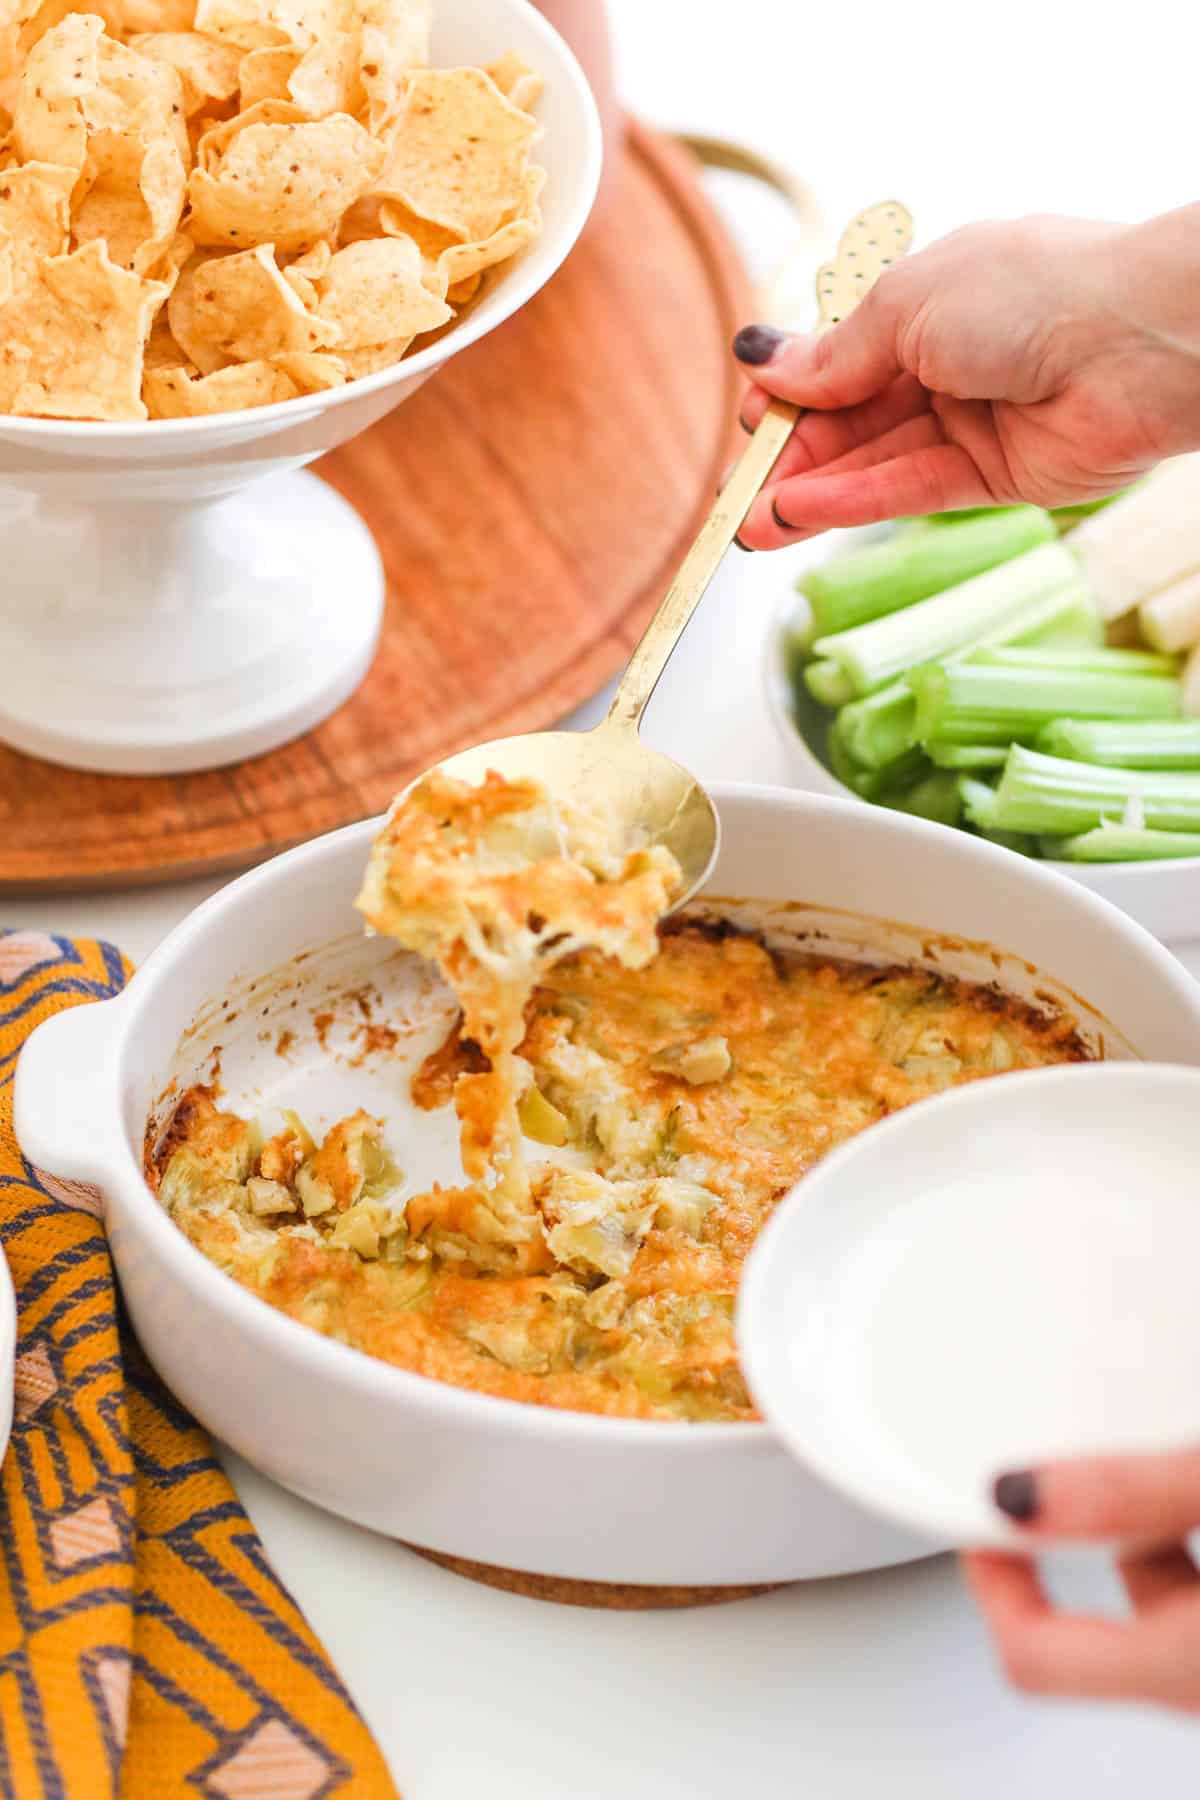 Scooping hot artichoke dip onto a small appetizer plate.